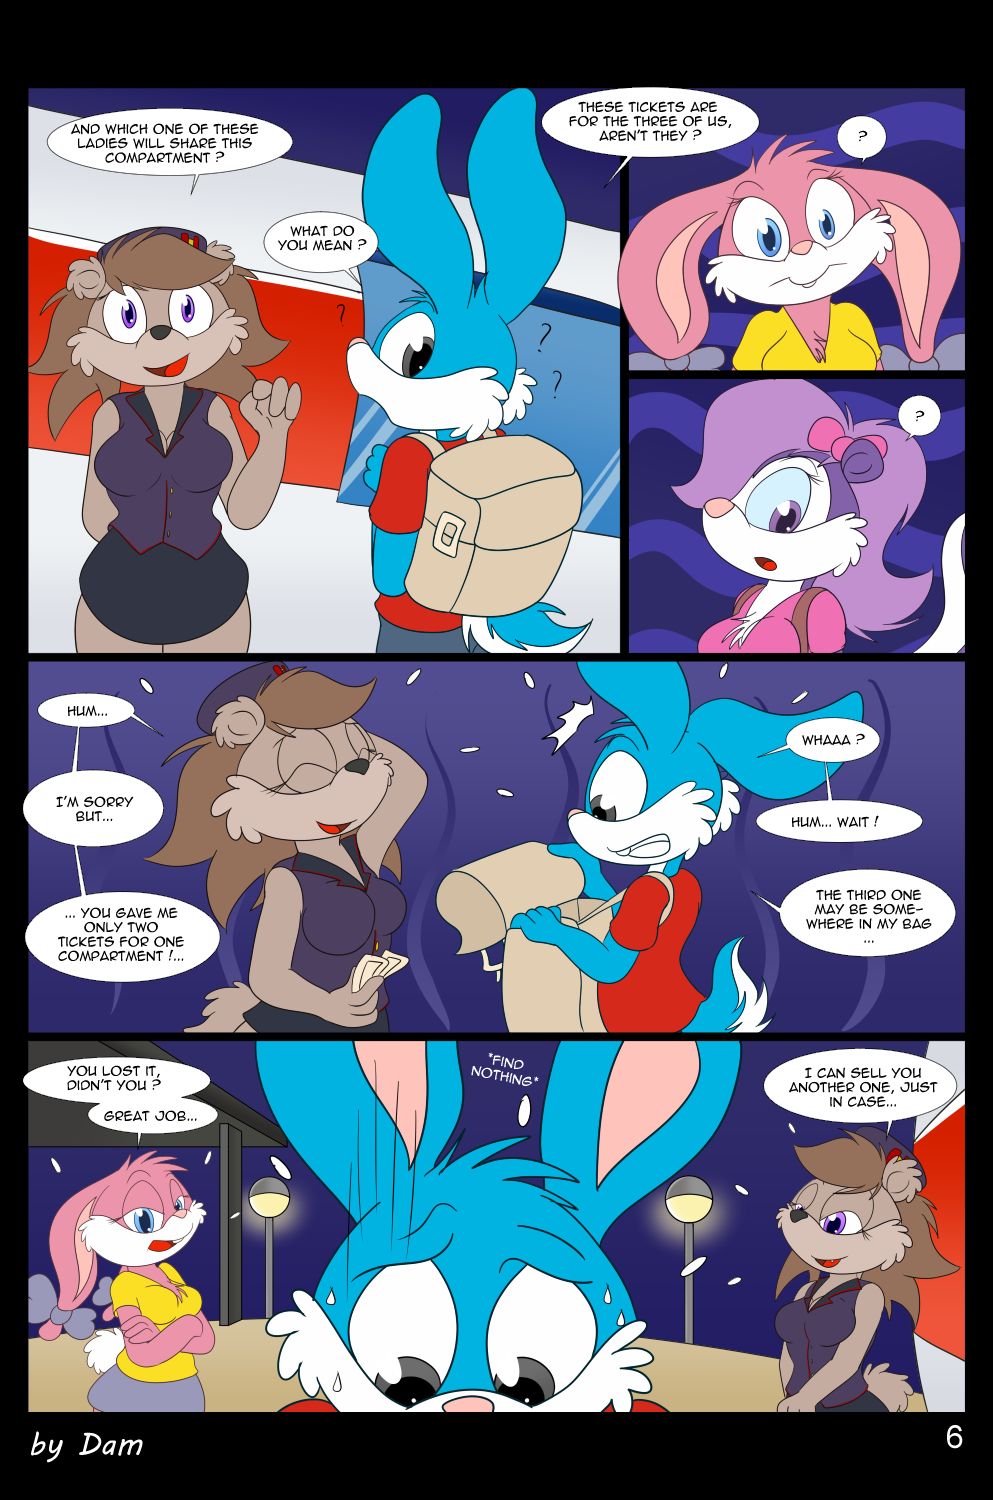 [Dam] Toons on a train [Ongoing] 6